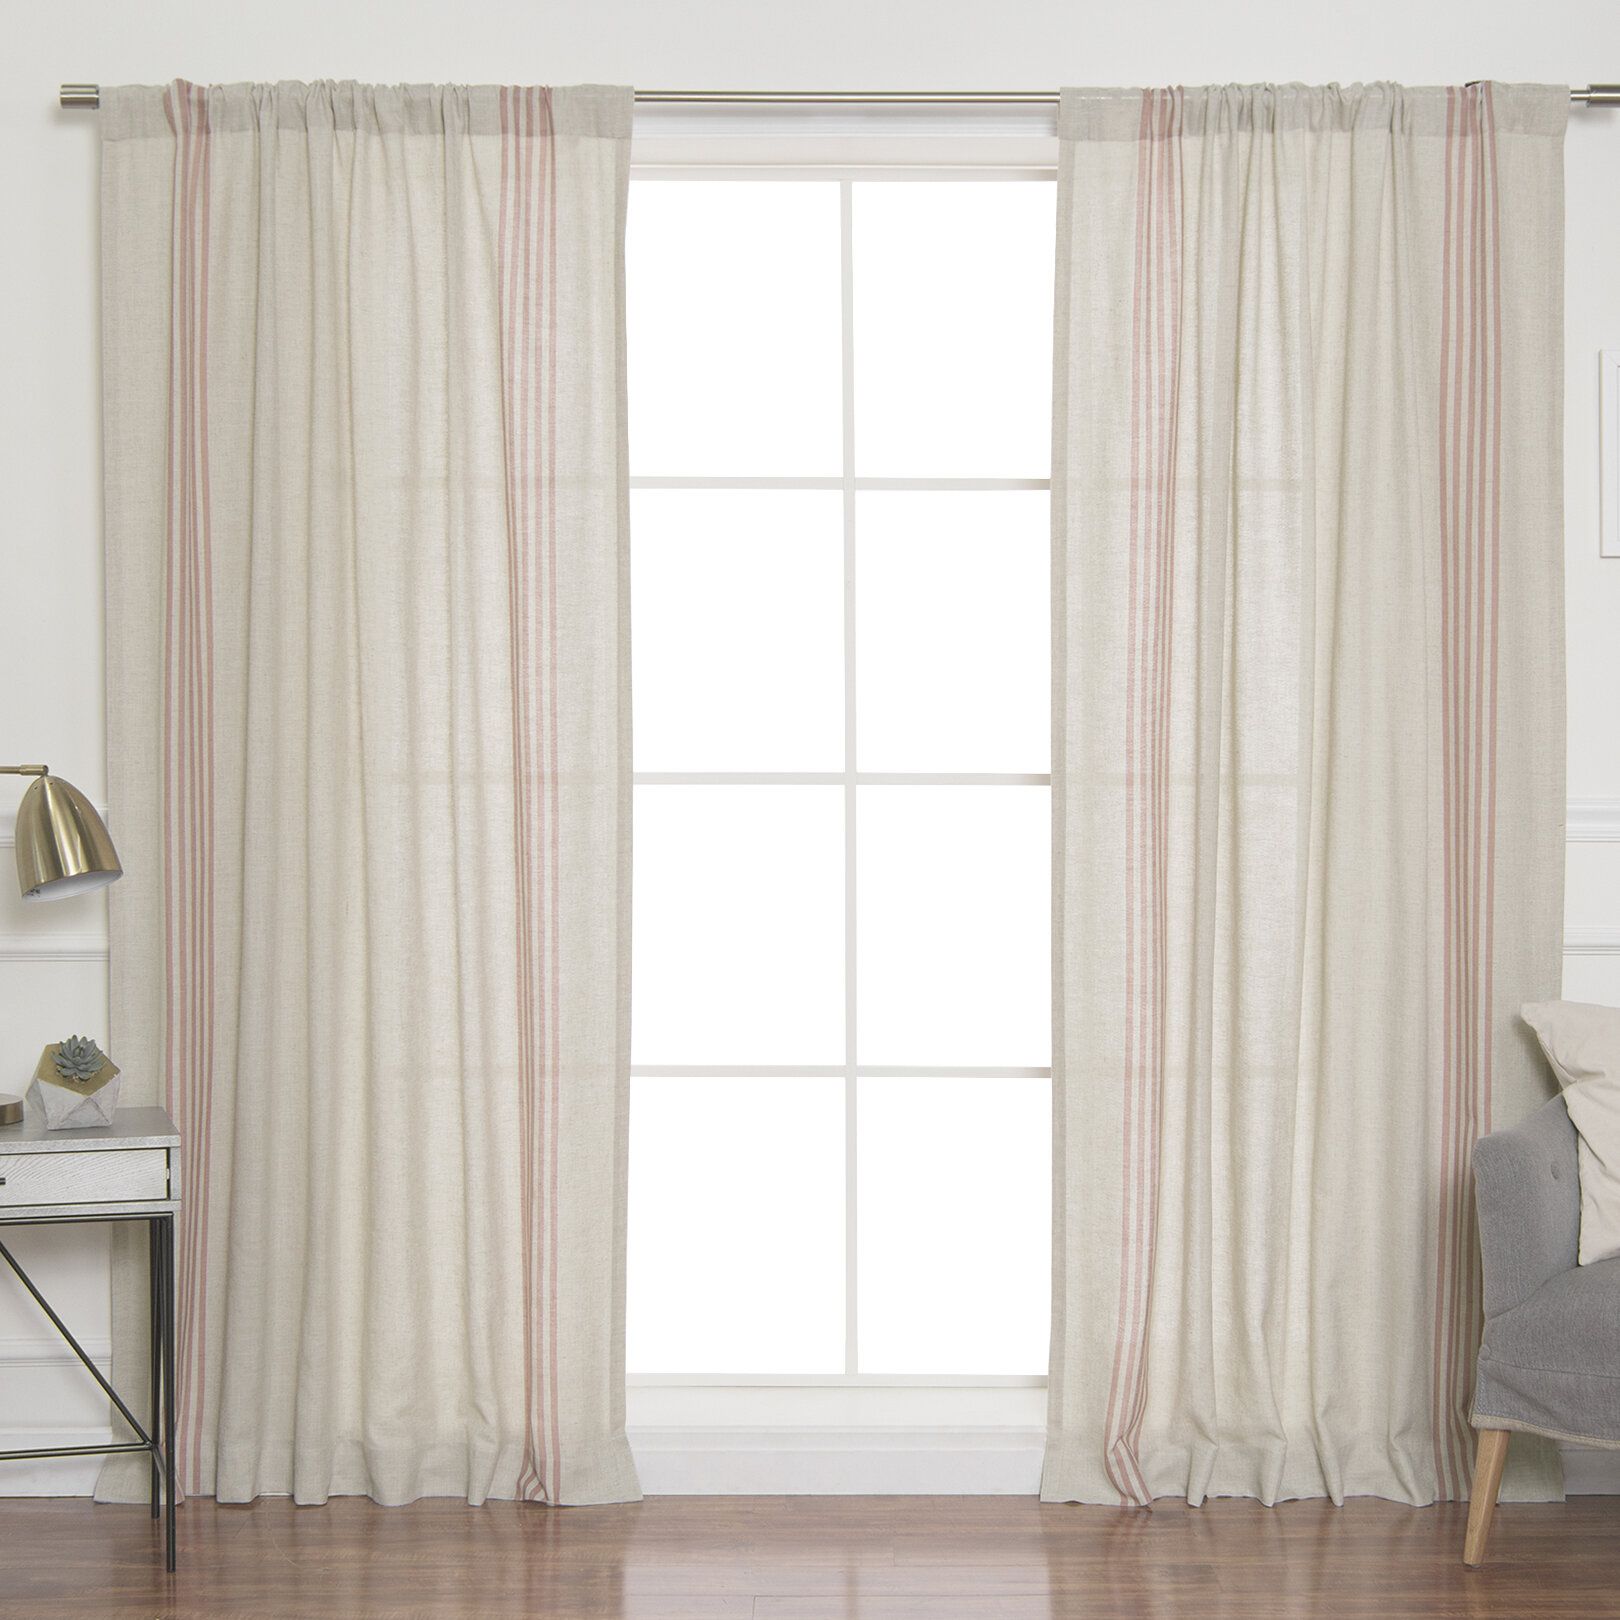 Bateman Striped Sheer Rod Pocket Curtain Panels With White Micro Striped Semi Sheer Window Curtain Pieces (View 13 of 20)